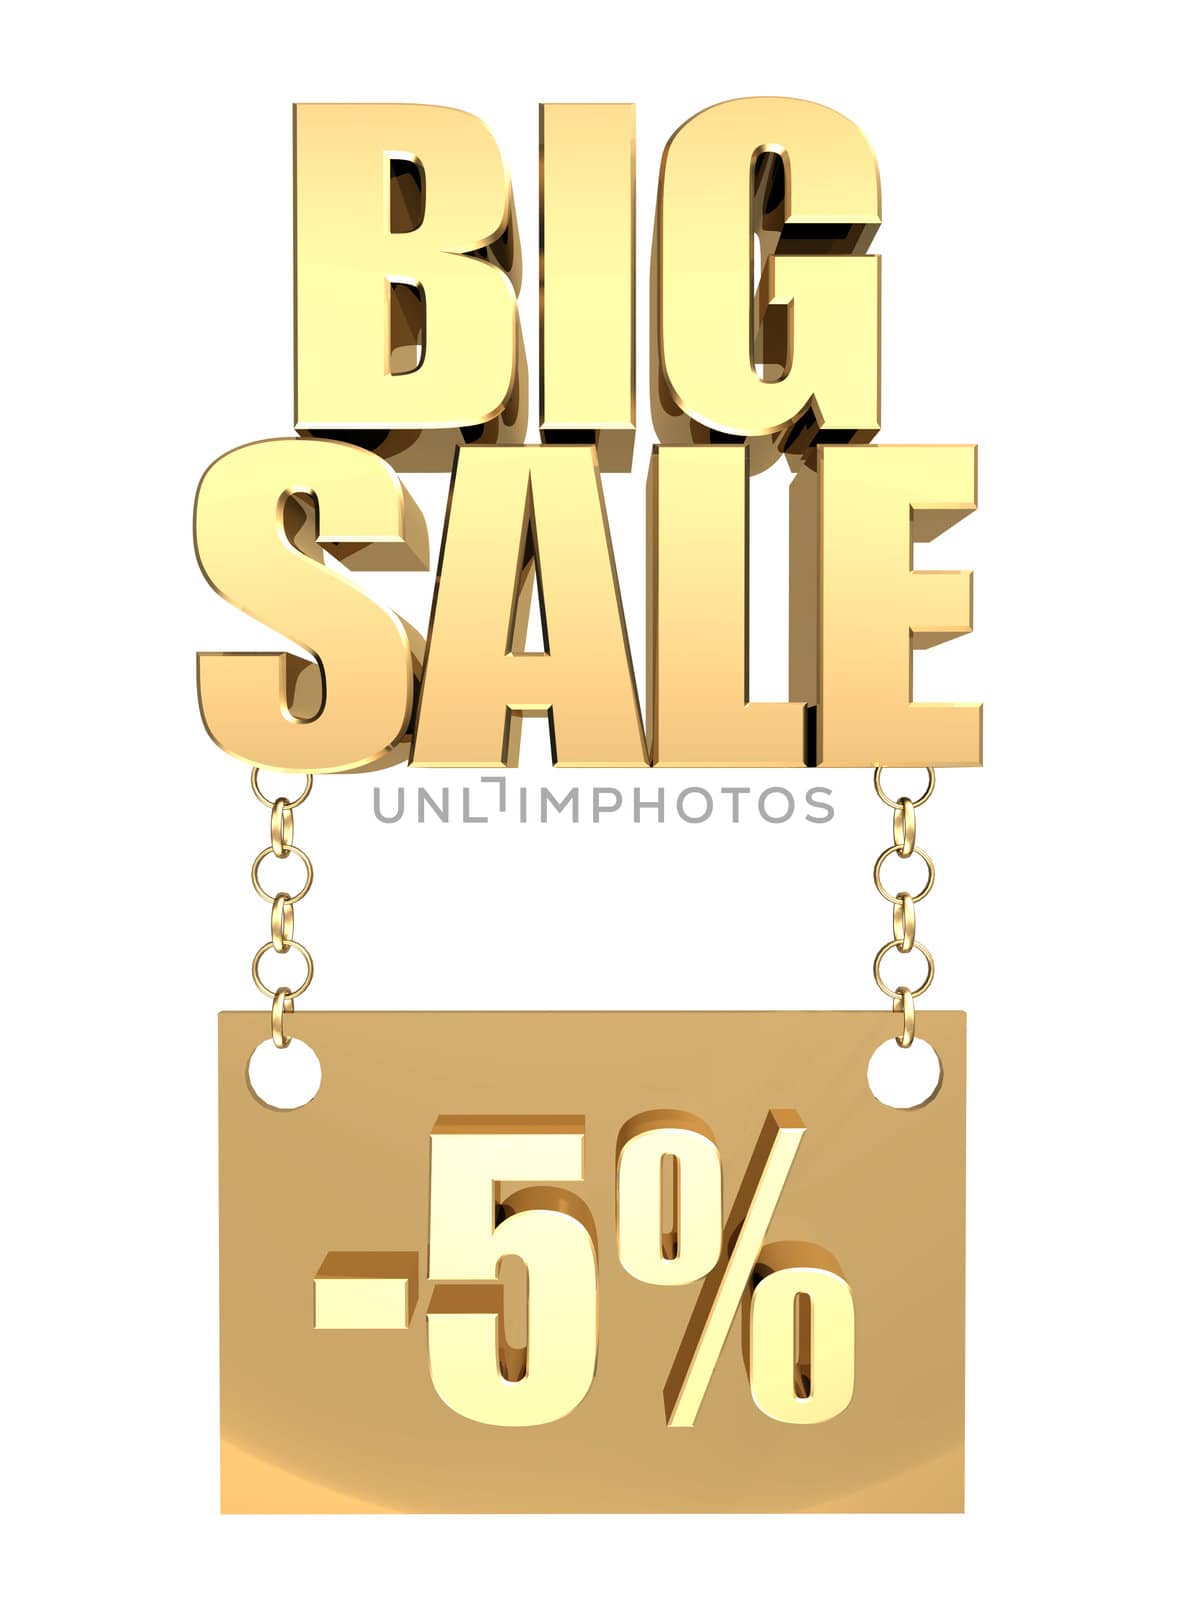 3D image of the text of a big sale, made of pure, beautiful gold